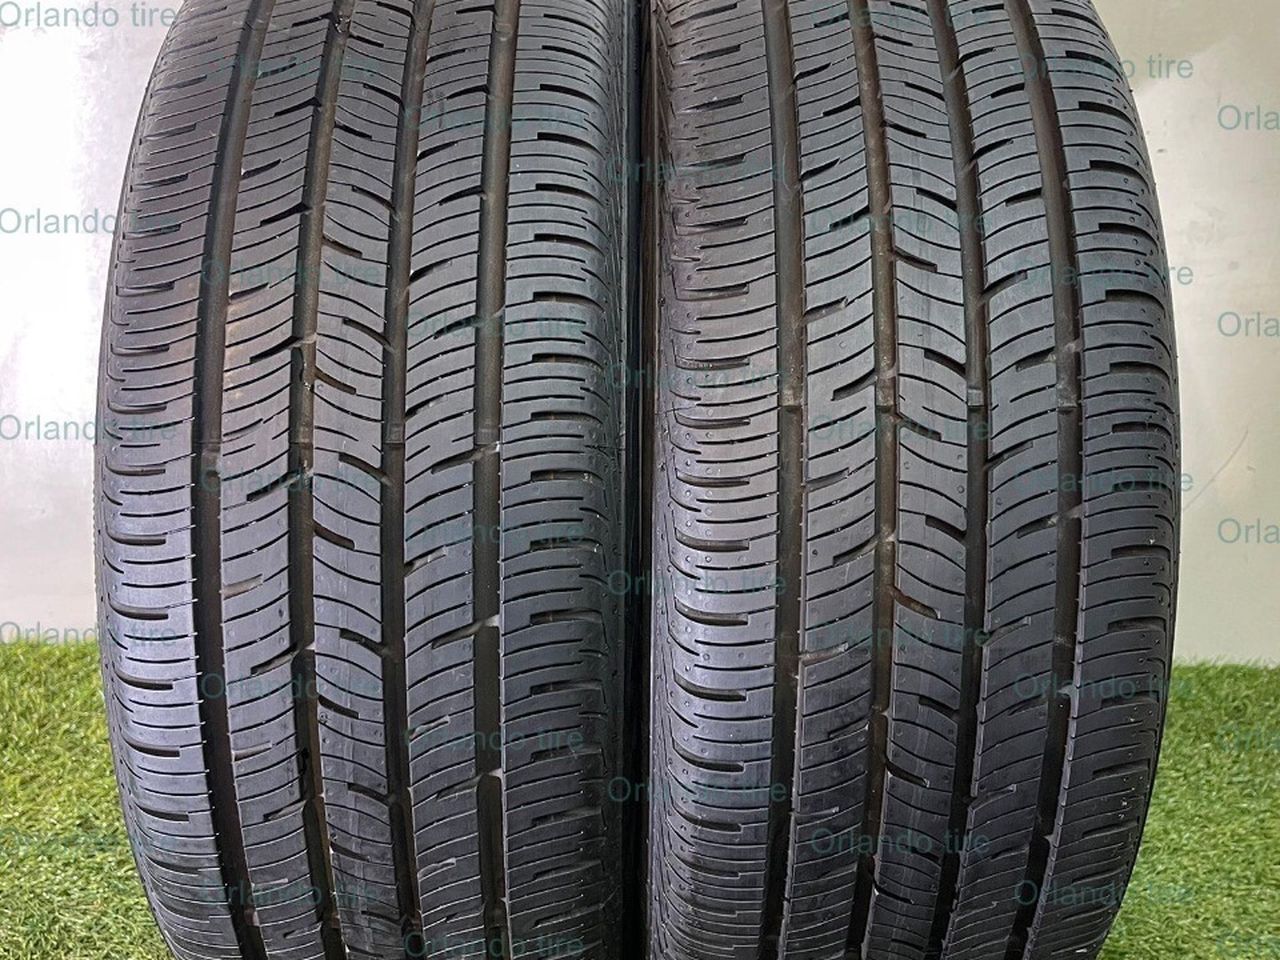 D48  205 50 17 89V  Continental  ContiProContact  2 Used Tires  95% Life 